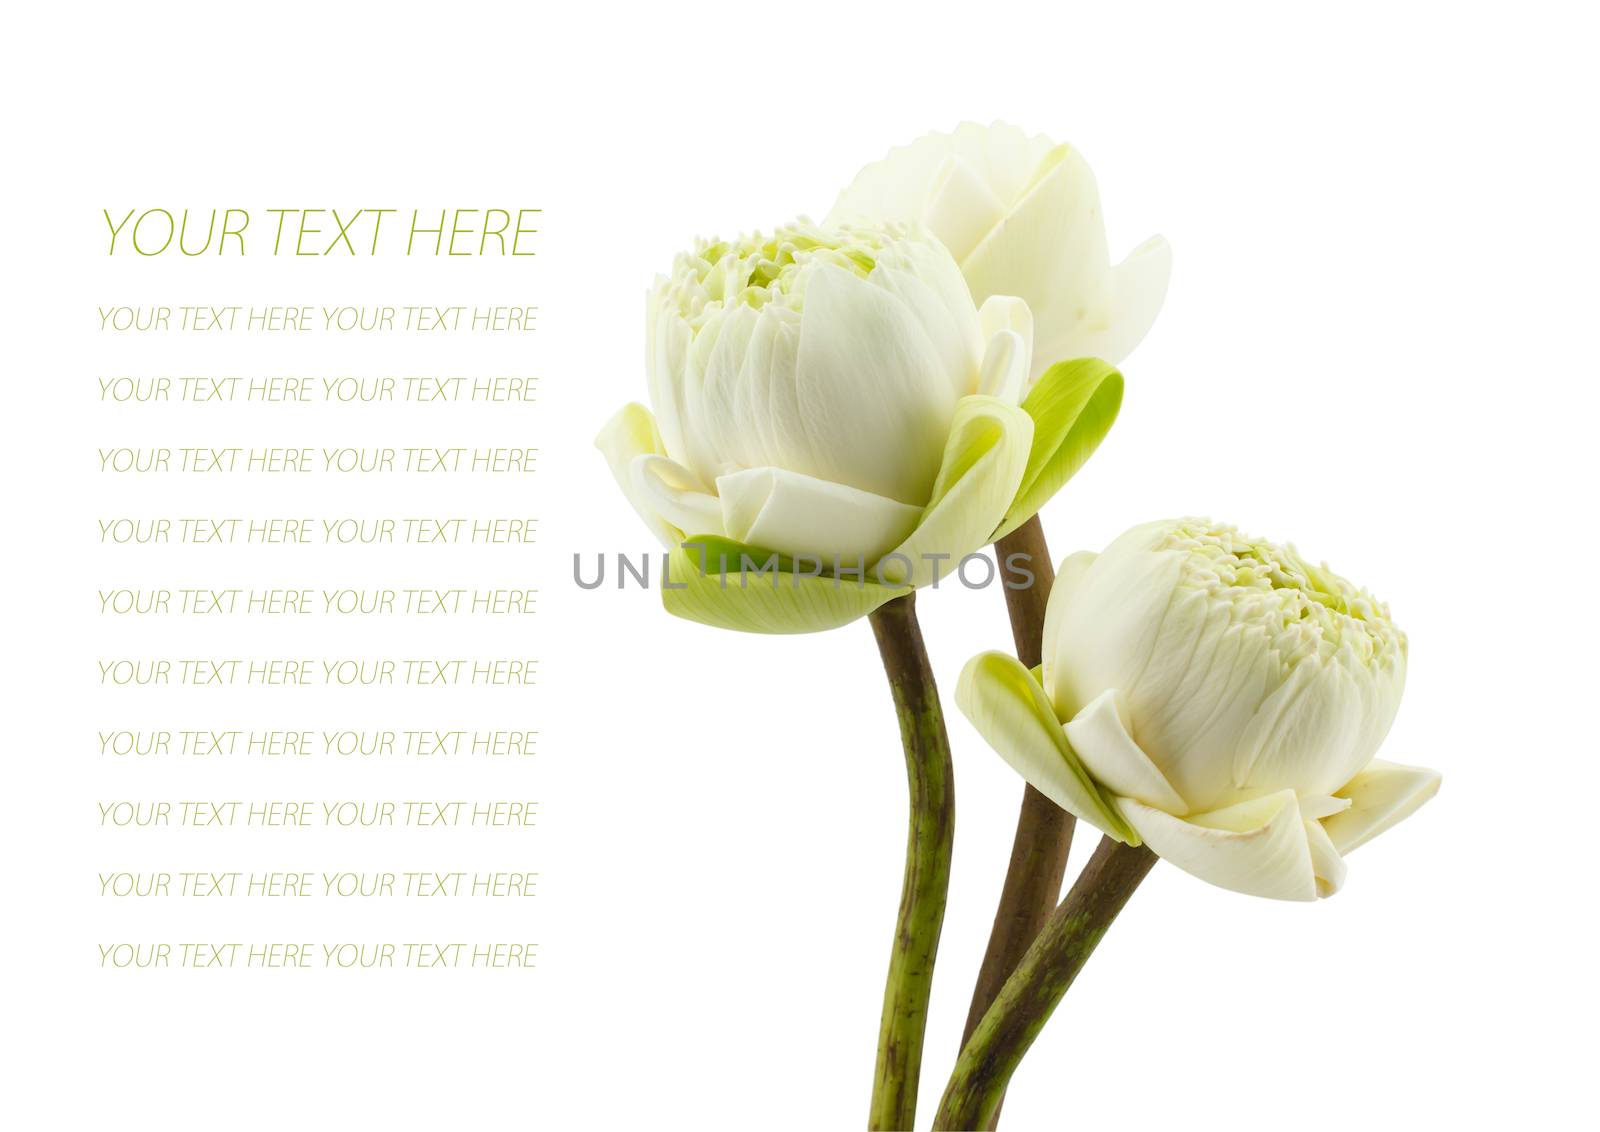 petal of the green three lotus flowers blossom isolated on white background